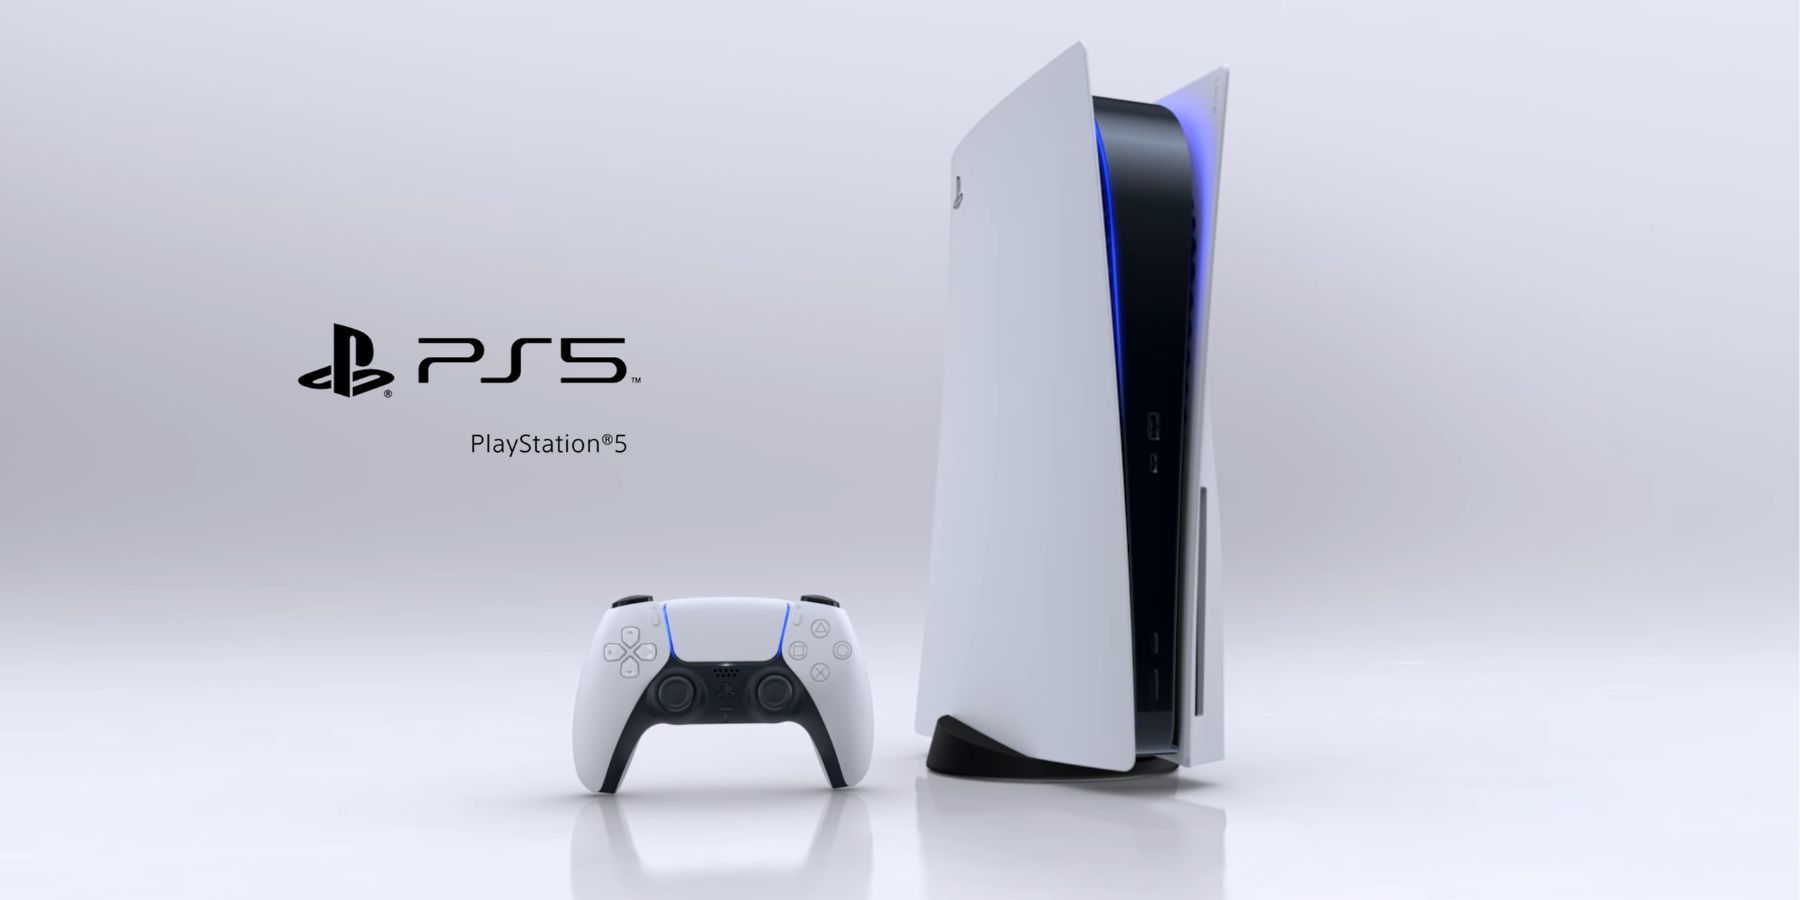 The Playstation 5 console with its logo and a controller